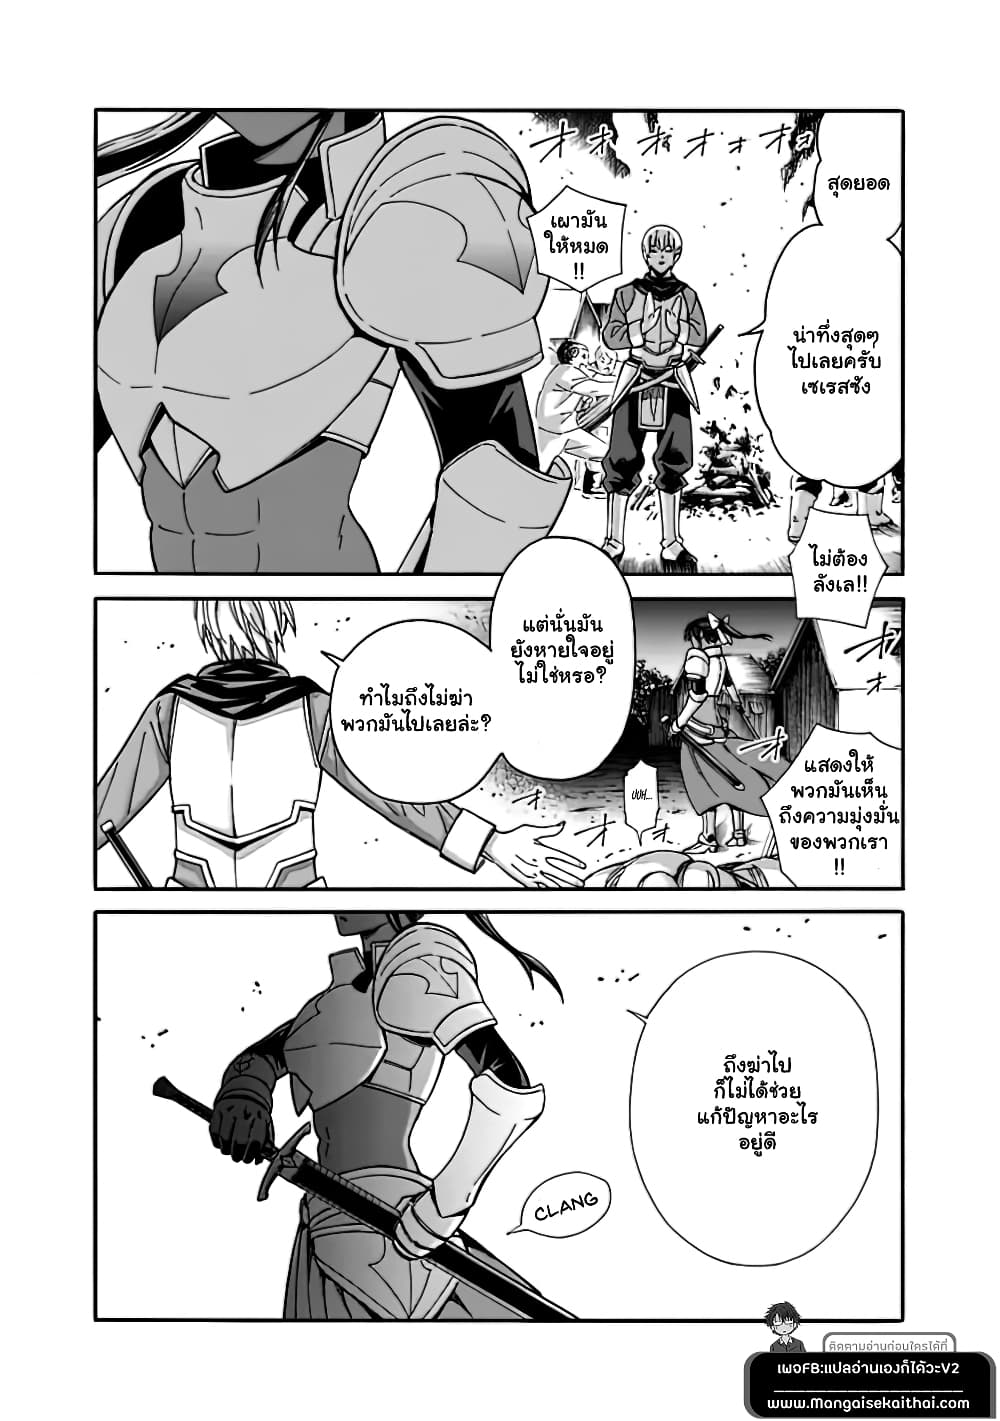 The Best Noble In Another World10.2 (4)